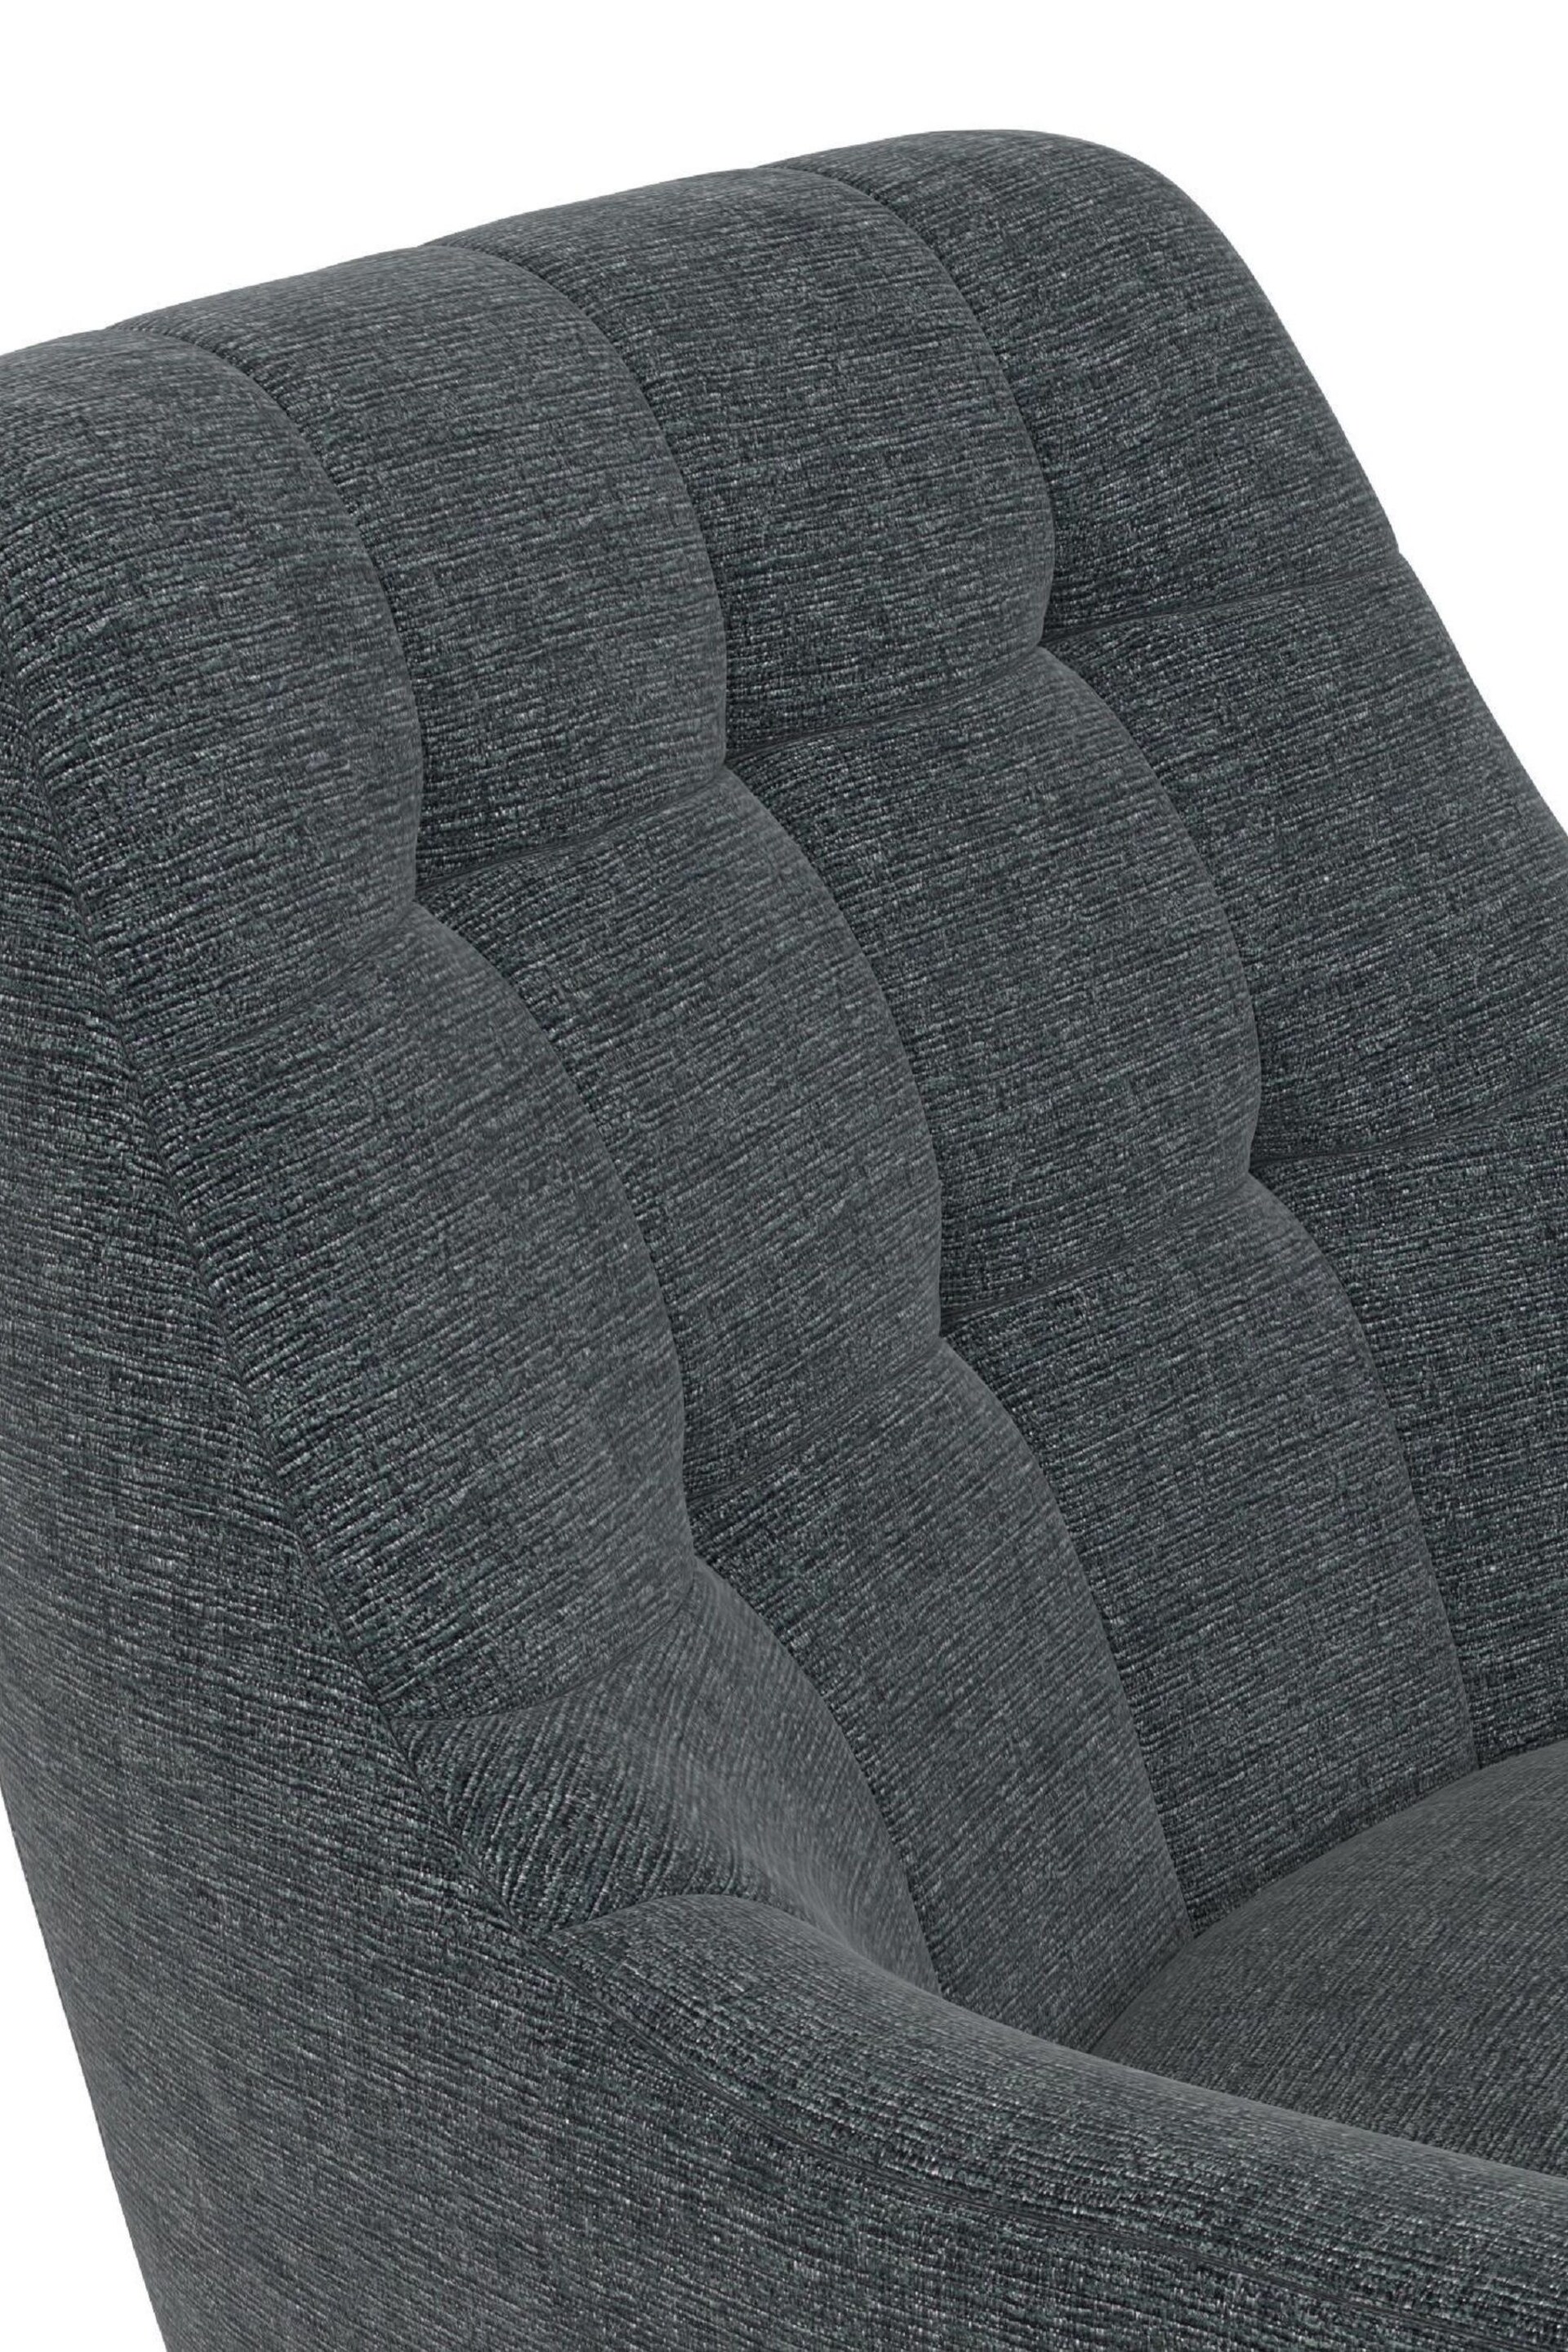 Dorel Home Grey Europe Brayden Accent Upholstered Chair - Image 4 of 4